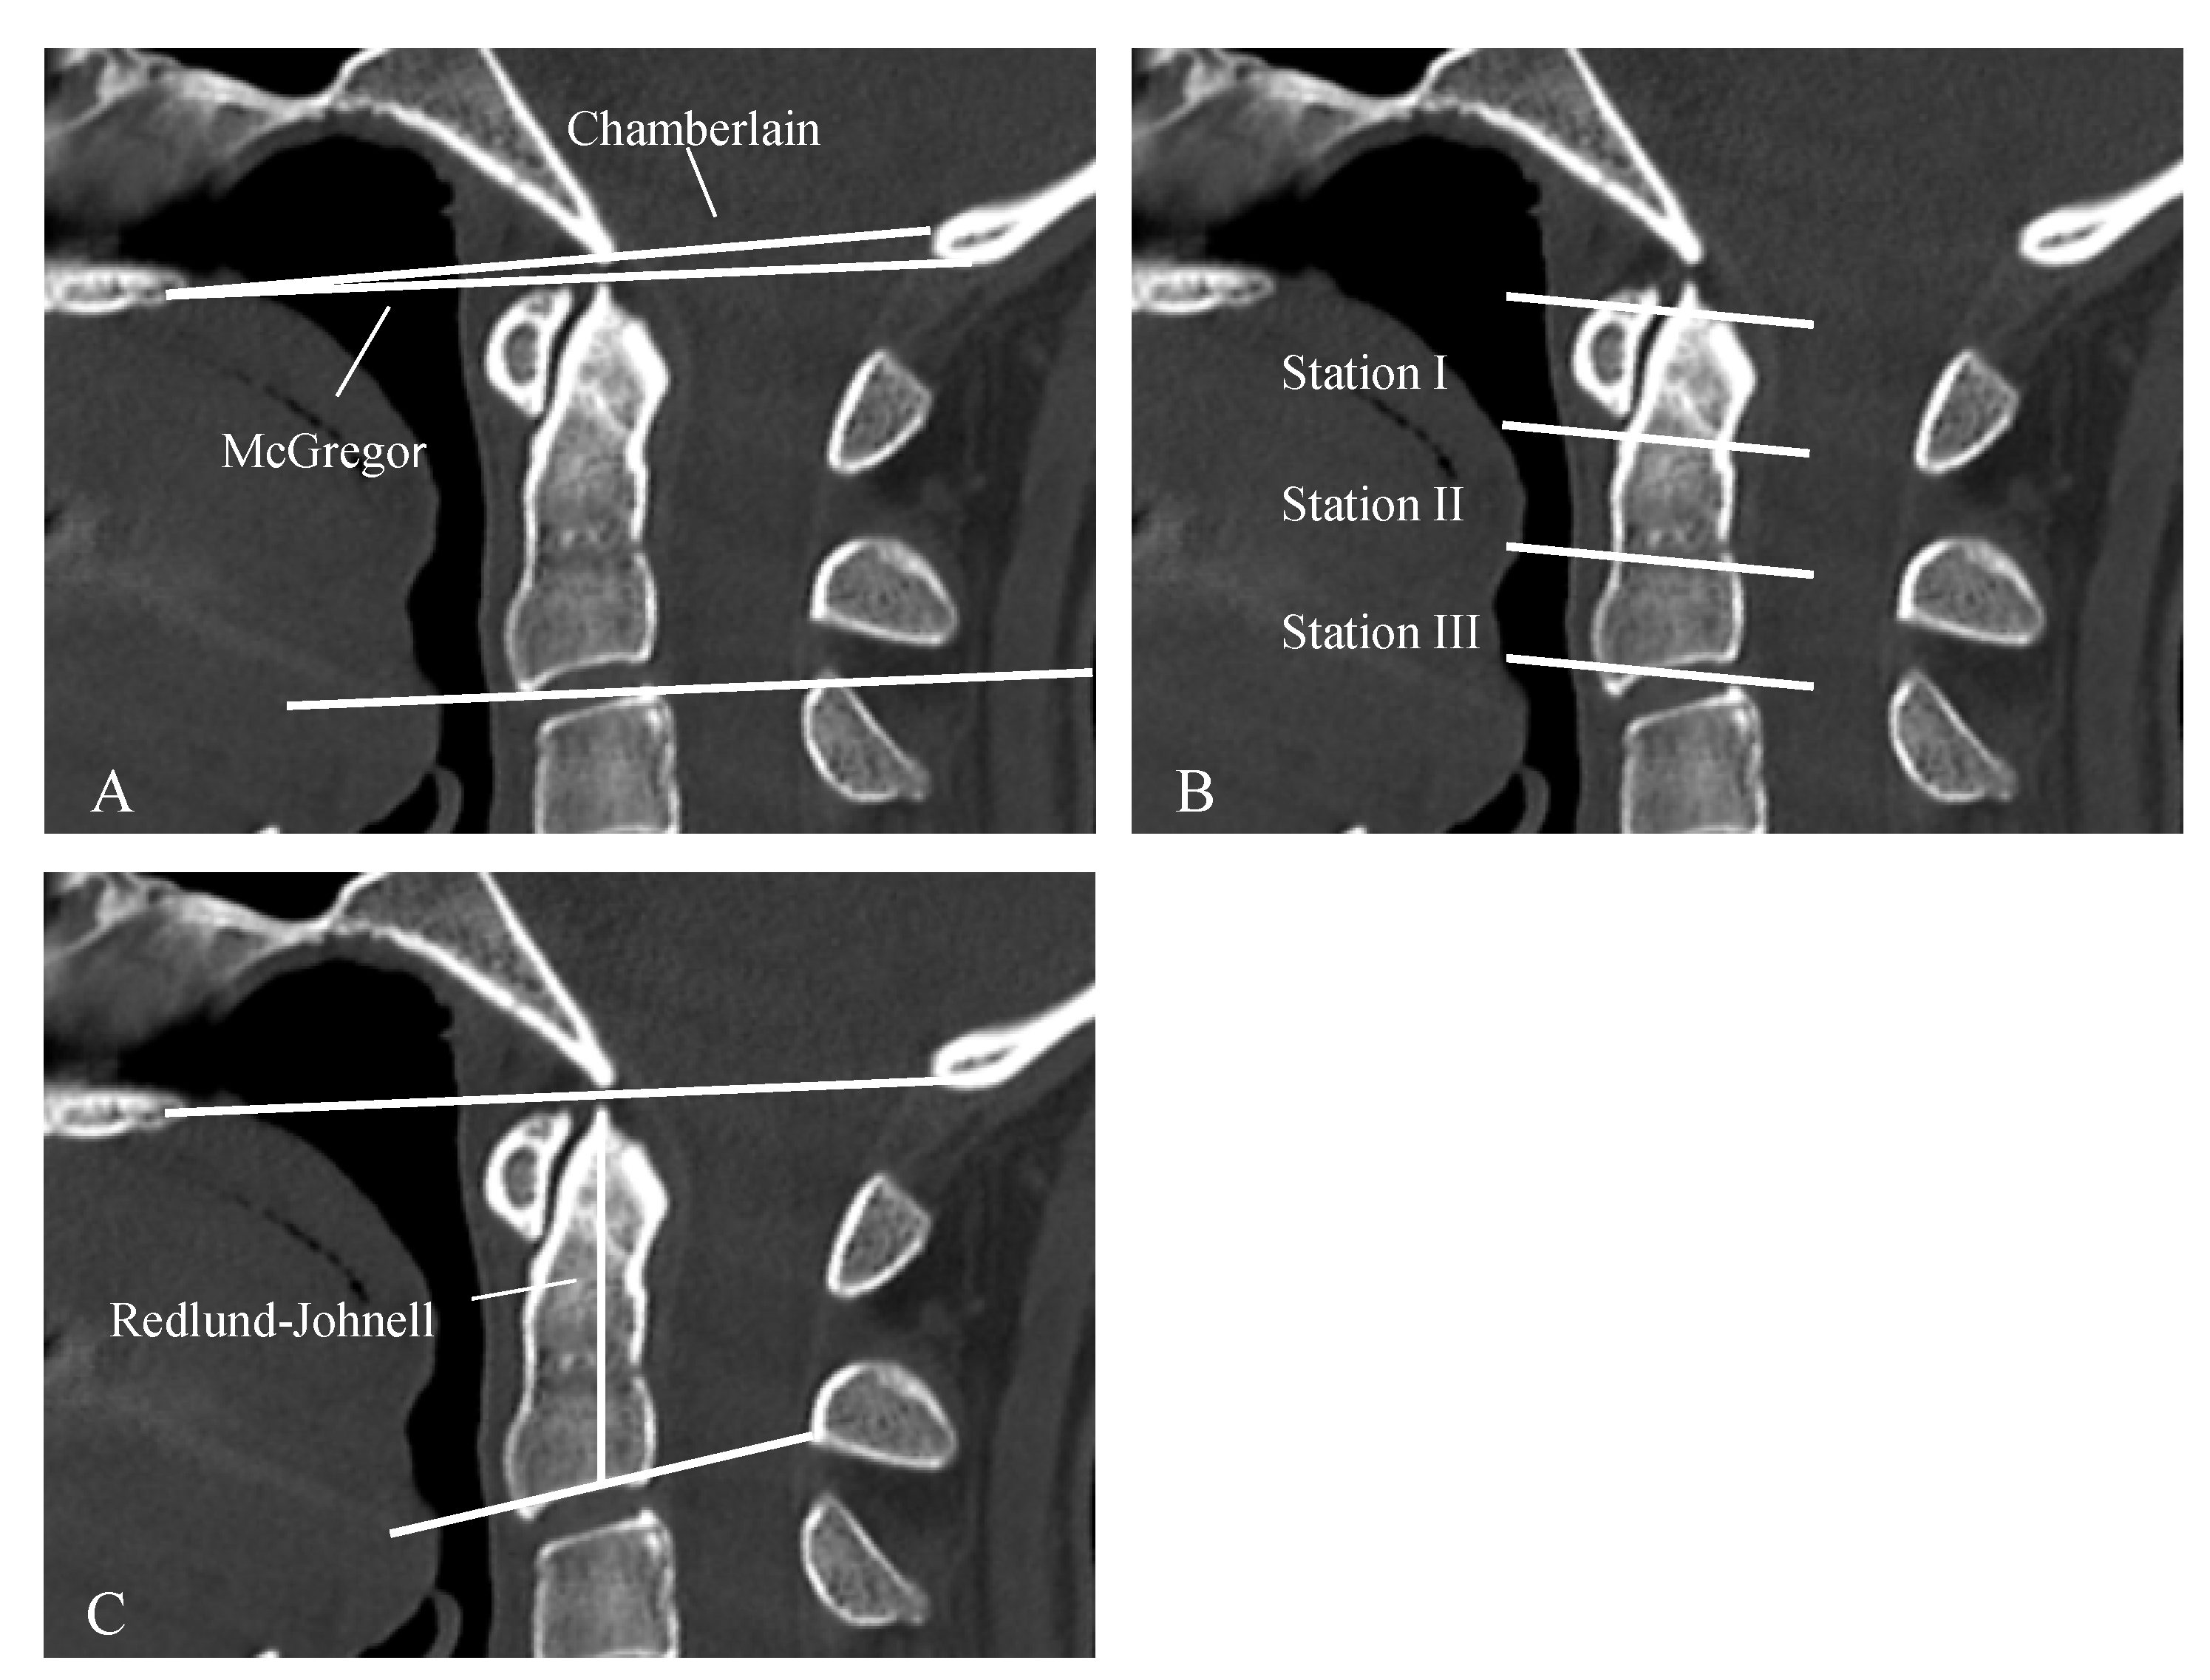 Jcm Free Full Text Cervical Myelopathy In Patients Suffering From Rheumatoid Arthritis A Case Series Of 9 Patients And A Review Of The Literature Html